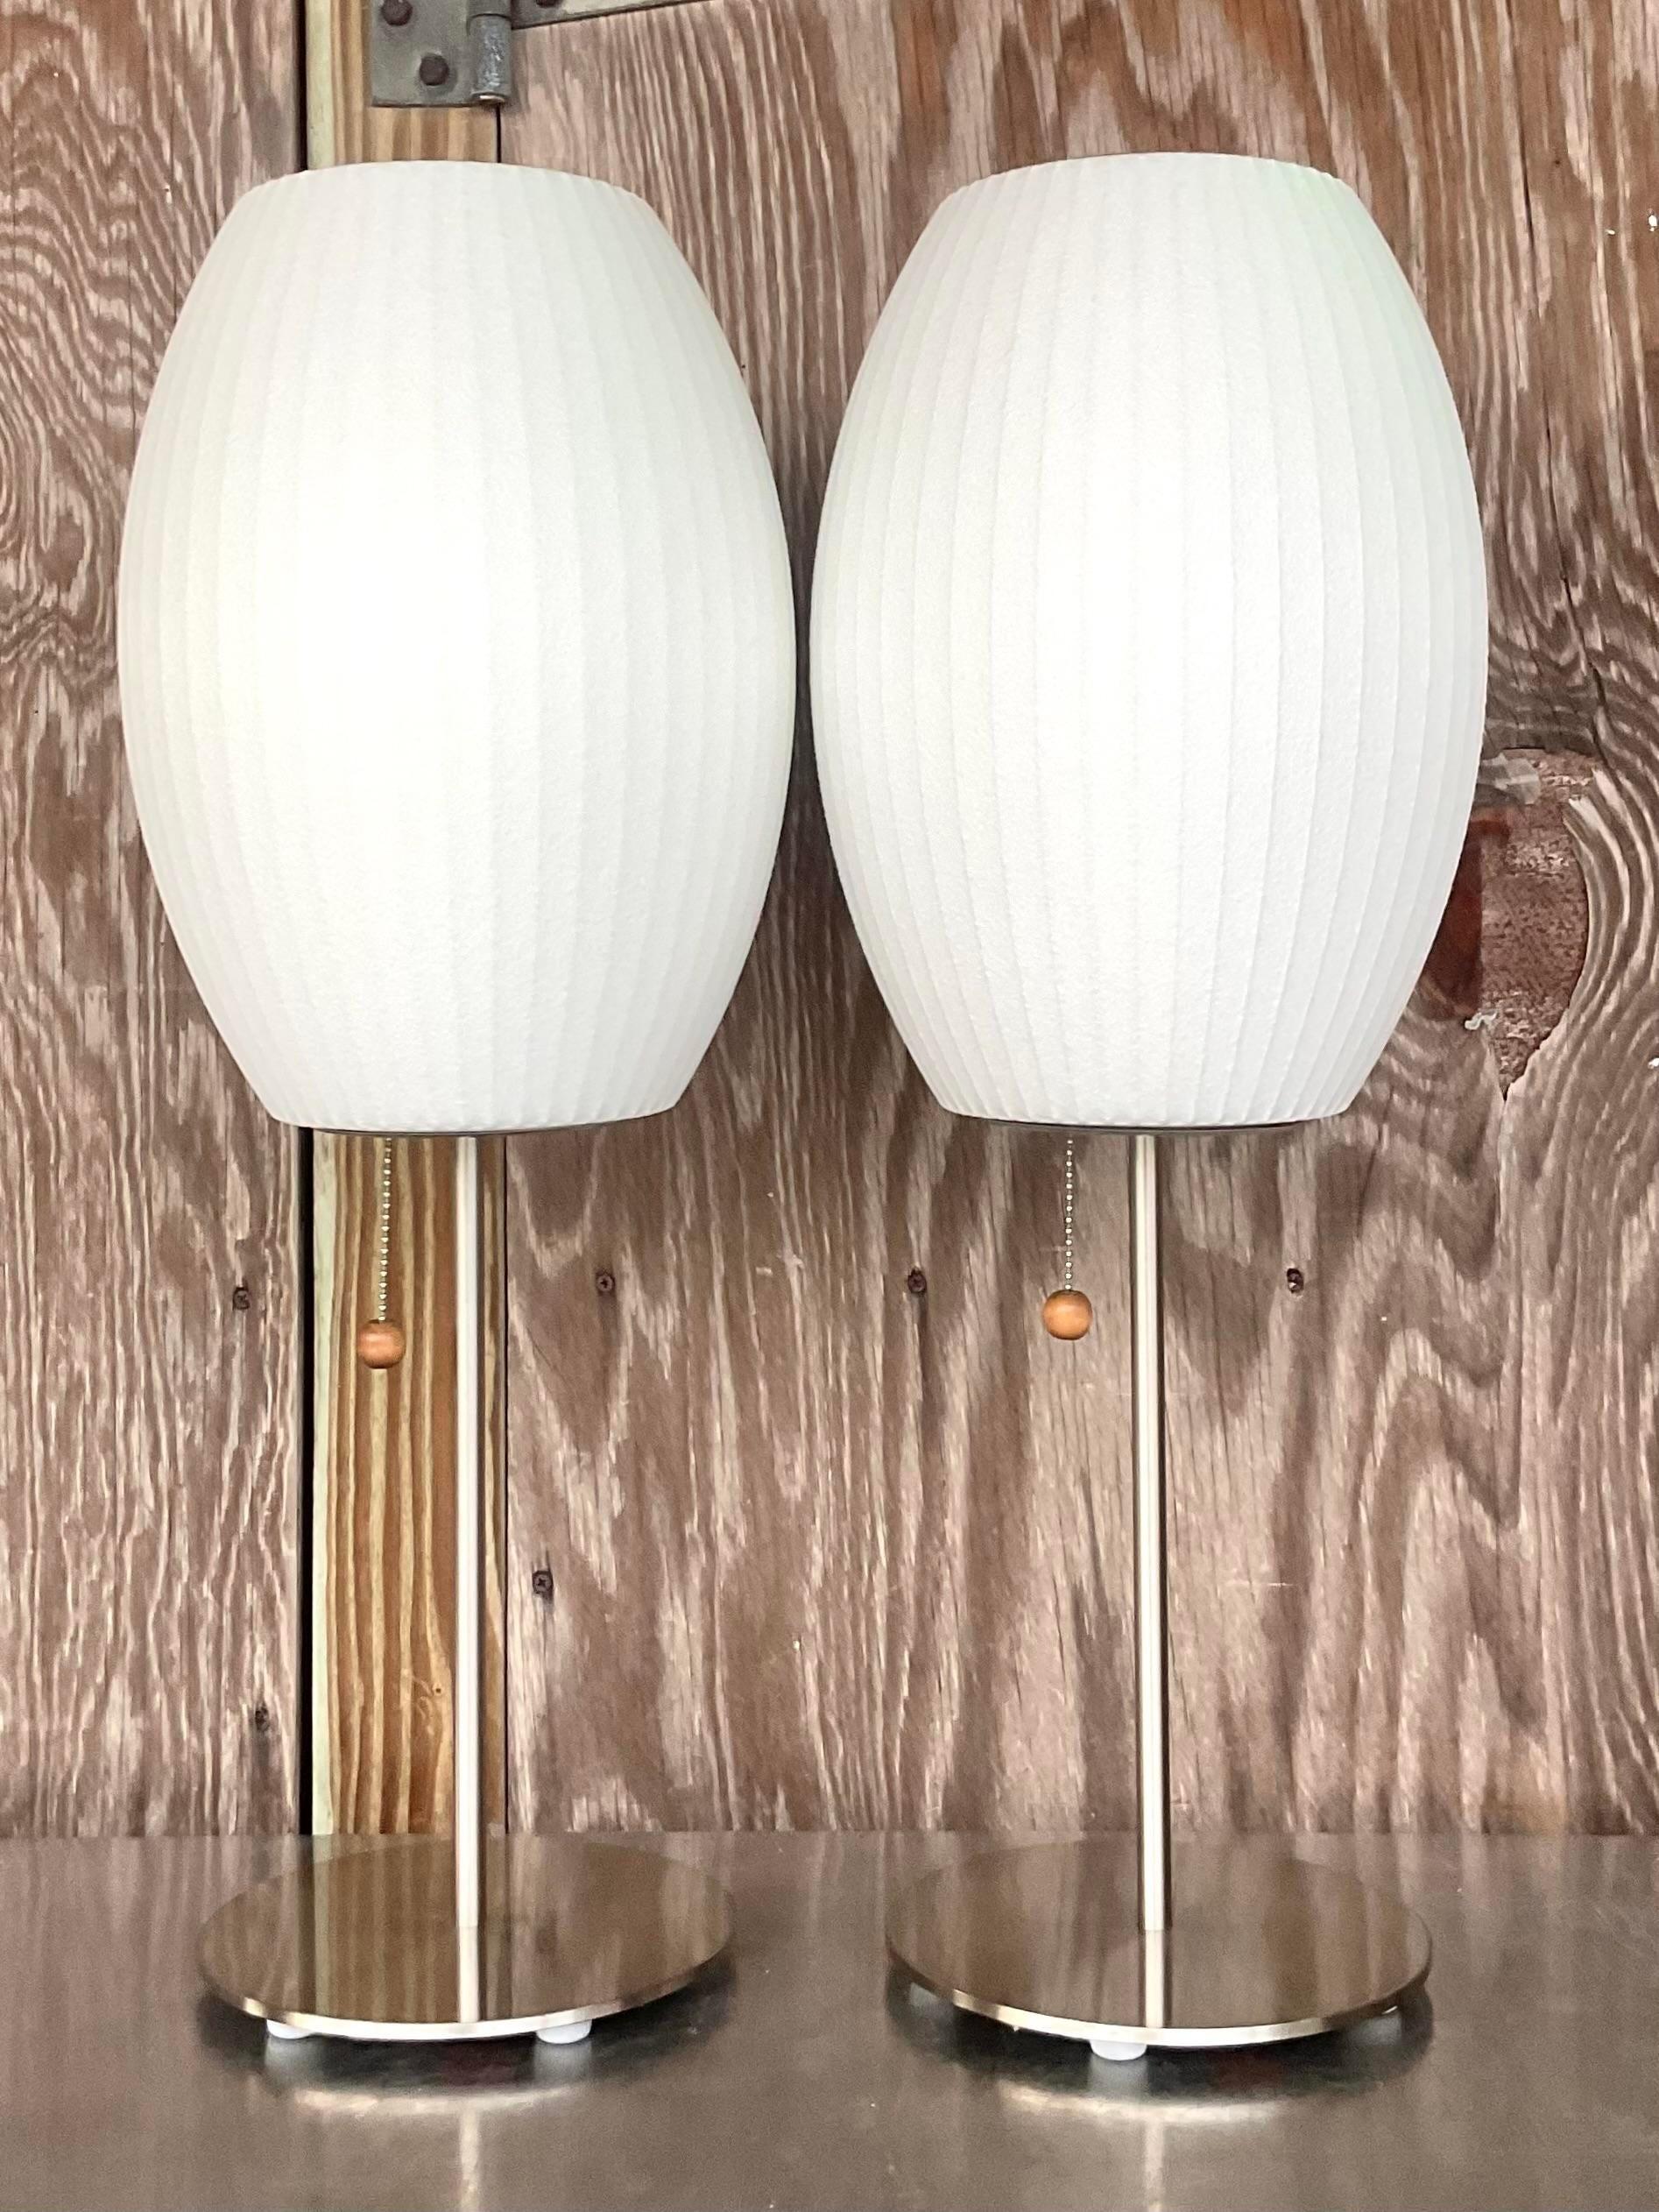 A fabulous pair of vintage Boho table lamps. Made by the LA based Modernica group. Their classic Bubble lamps after George Nelson. Tagged on the bottom. Acquired from a Palm Beach estate.